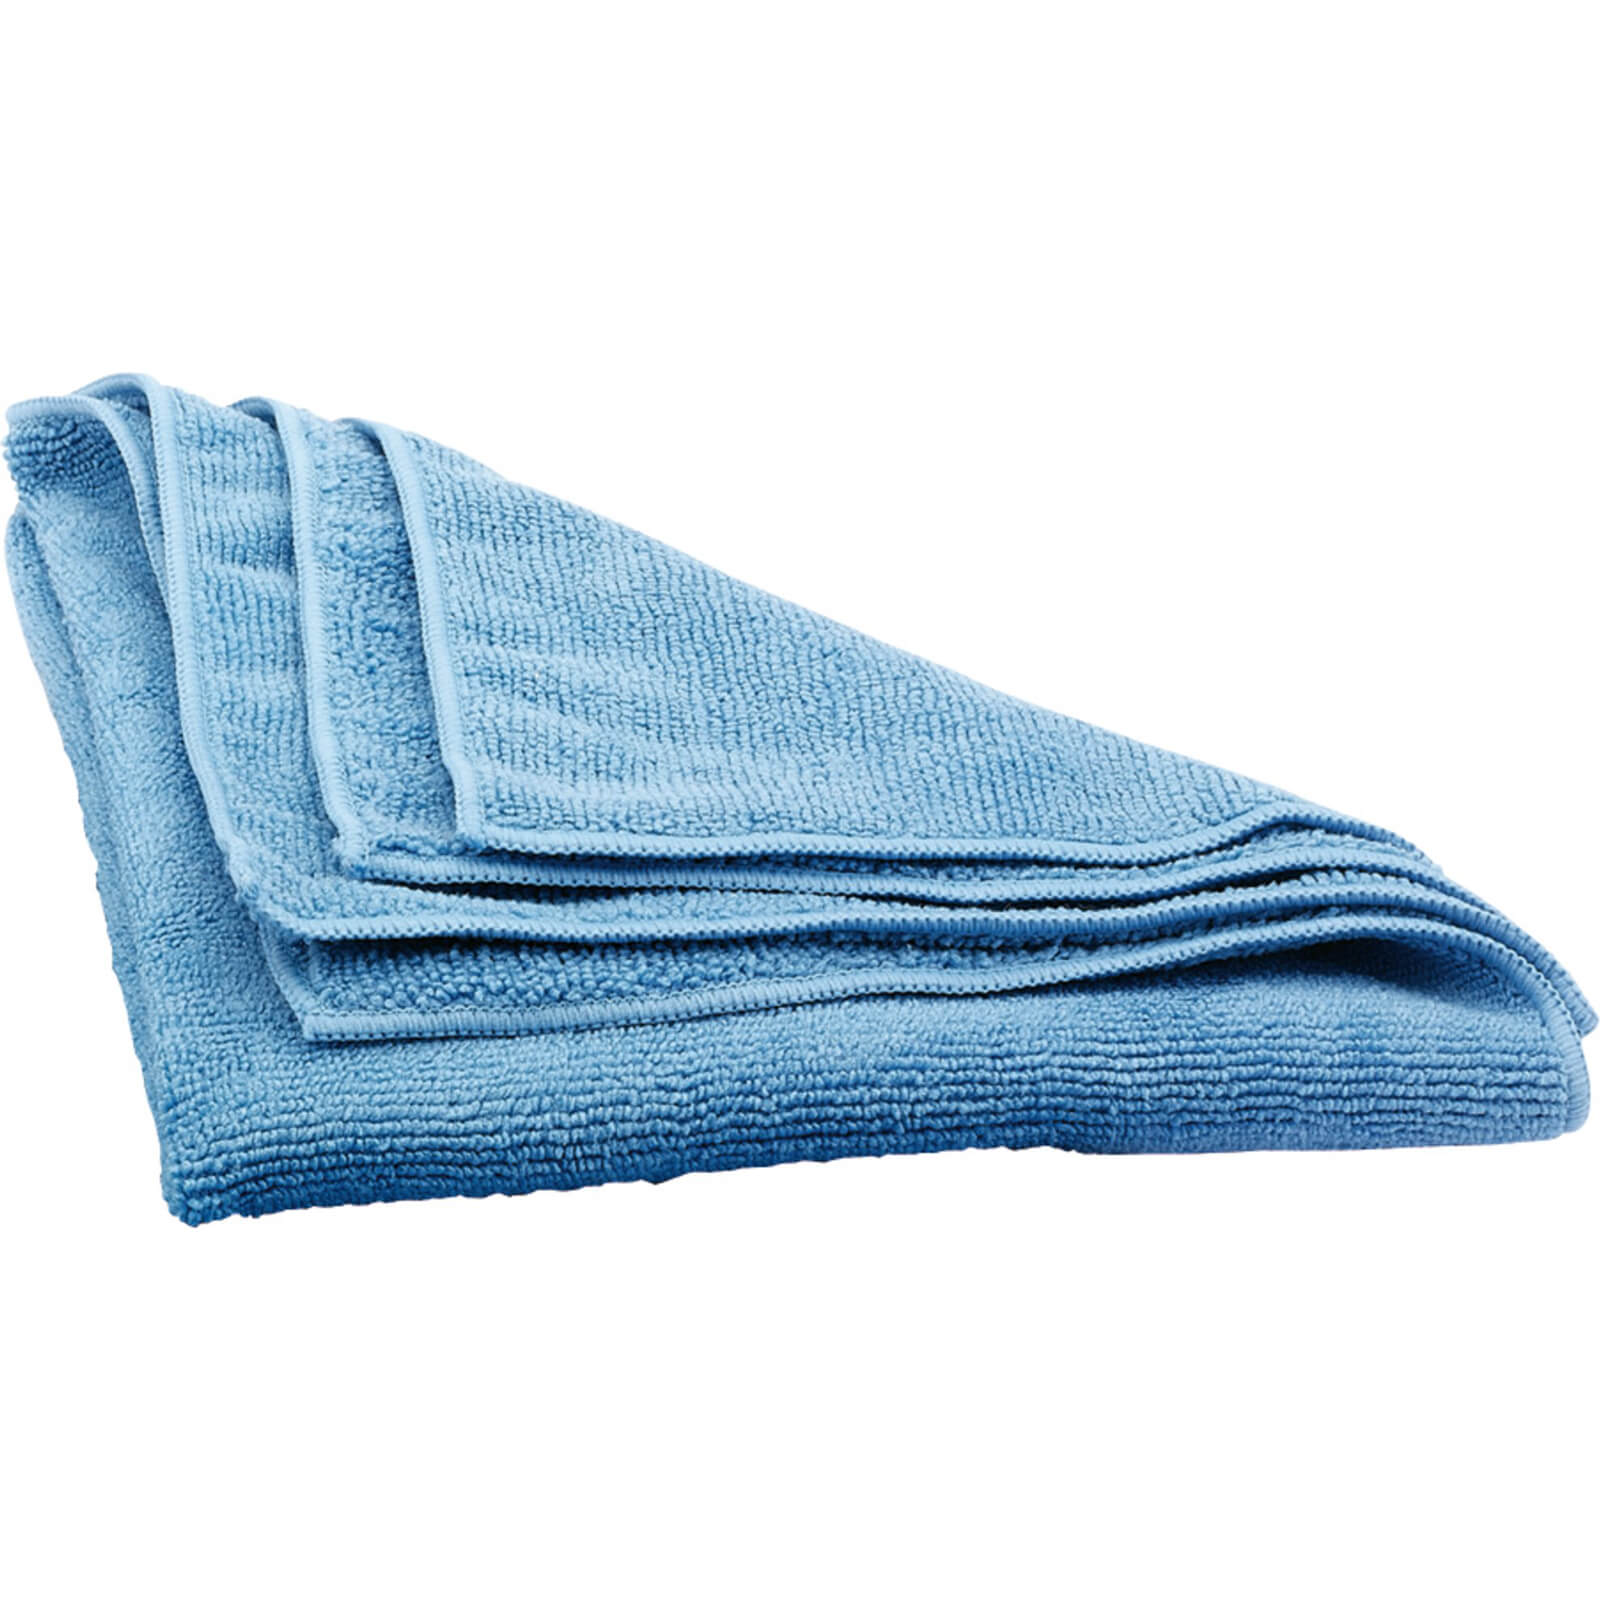 Image of Draper Microfibre Cleaning Cloths Pack of 2